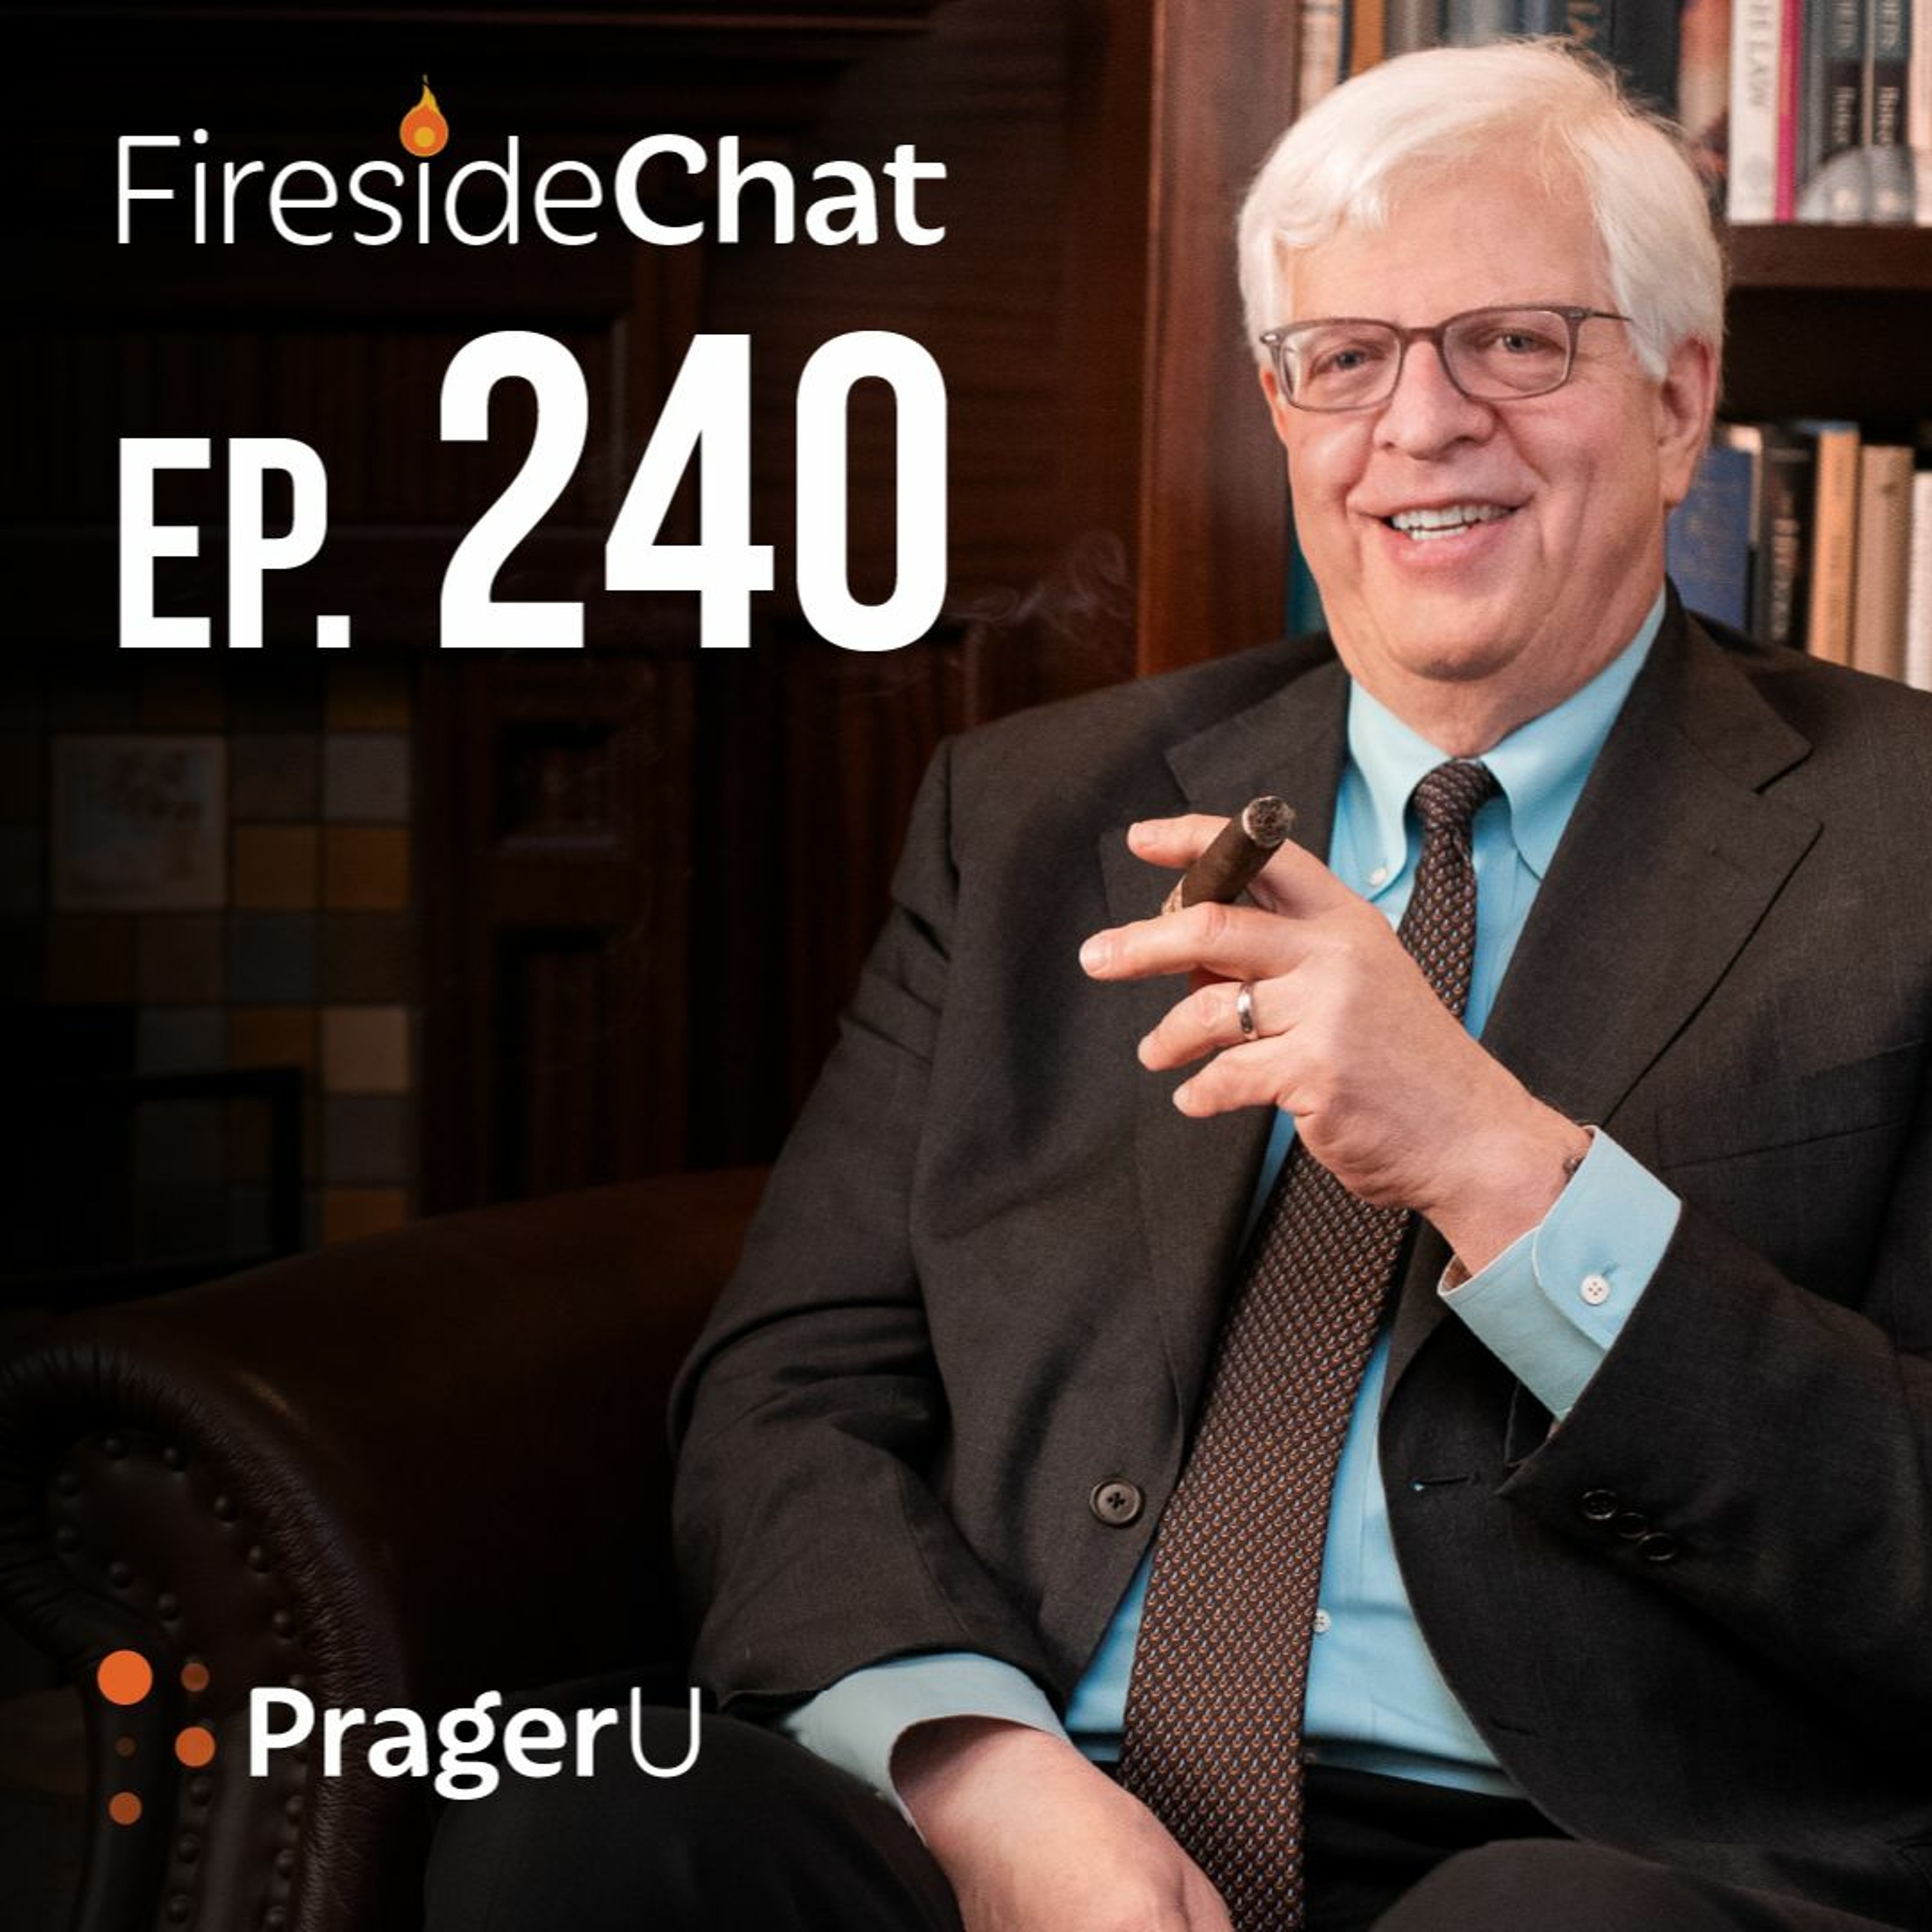 Fireside Chat Ep. 240 — Q&A with Self-Described Marxist Batya Ungar-Sargon